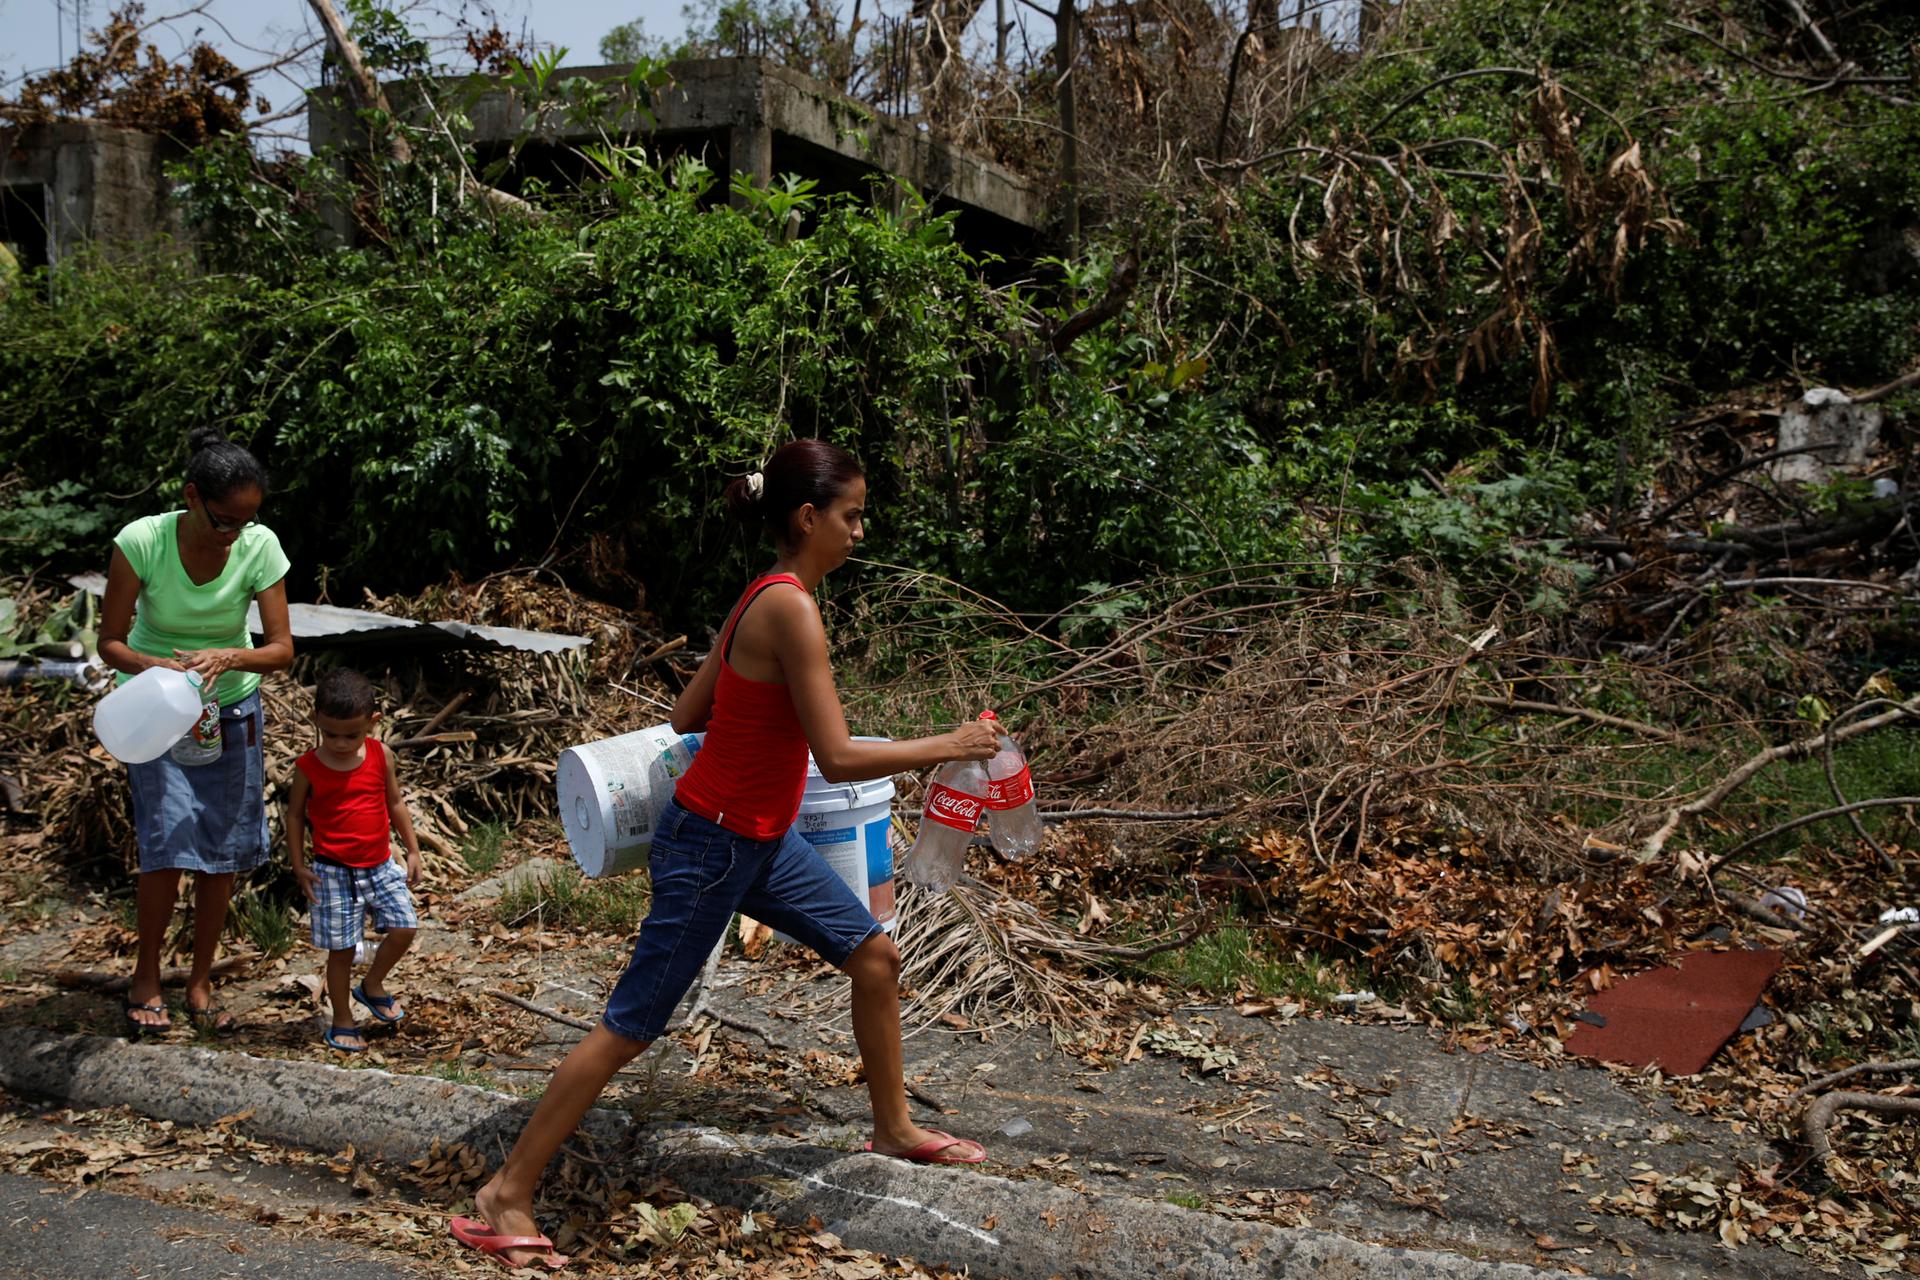 People carry containers that will be filled with water from a tank truck at an area hit by Hurricane Maria in Canovanas, Puerto Rico, Sept. 26, 2017.